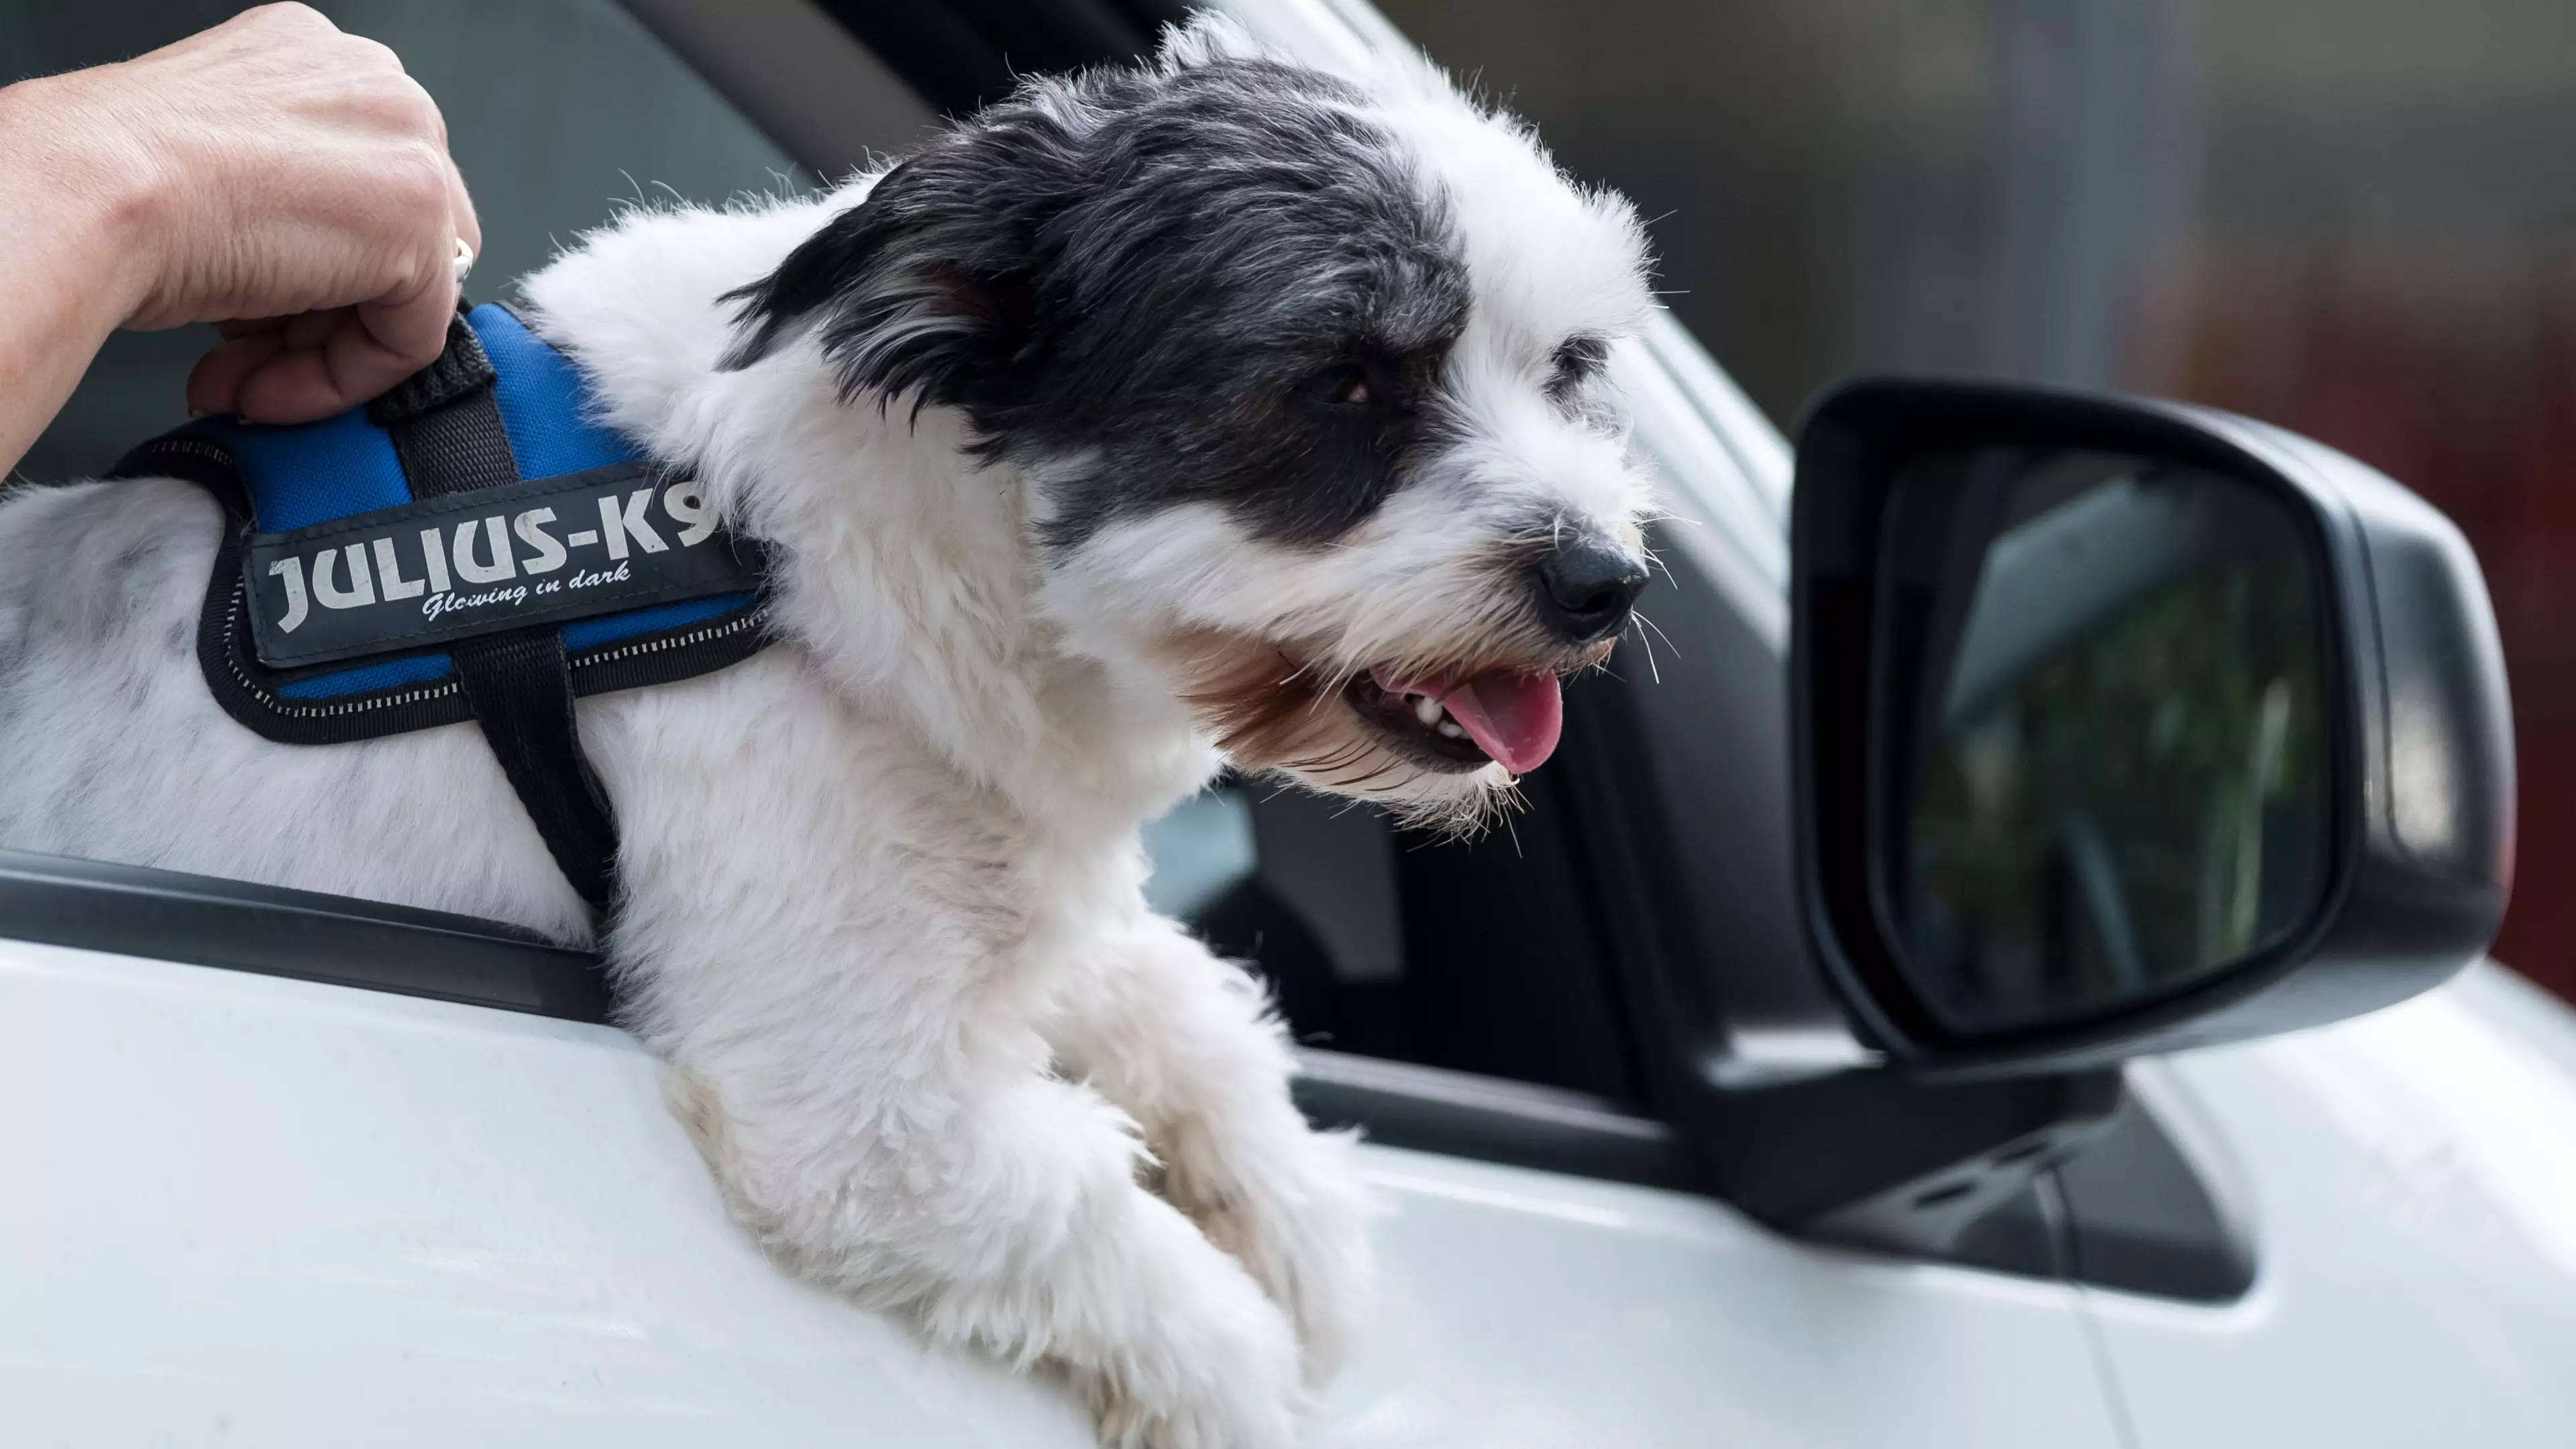 Driving With Your Pet In The Car Could Land You A Hefty Fine If It's Not Restrained